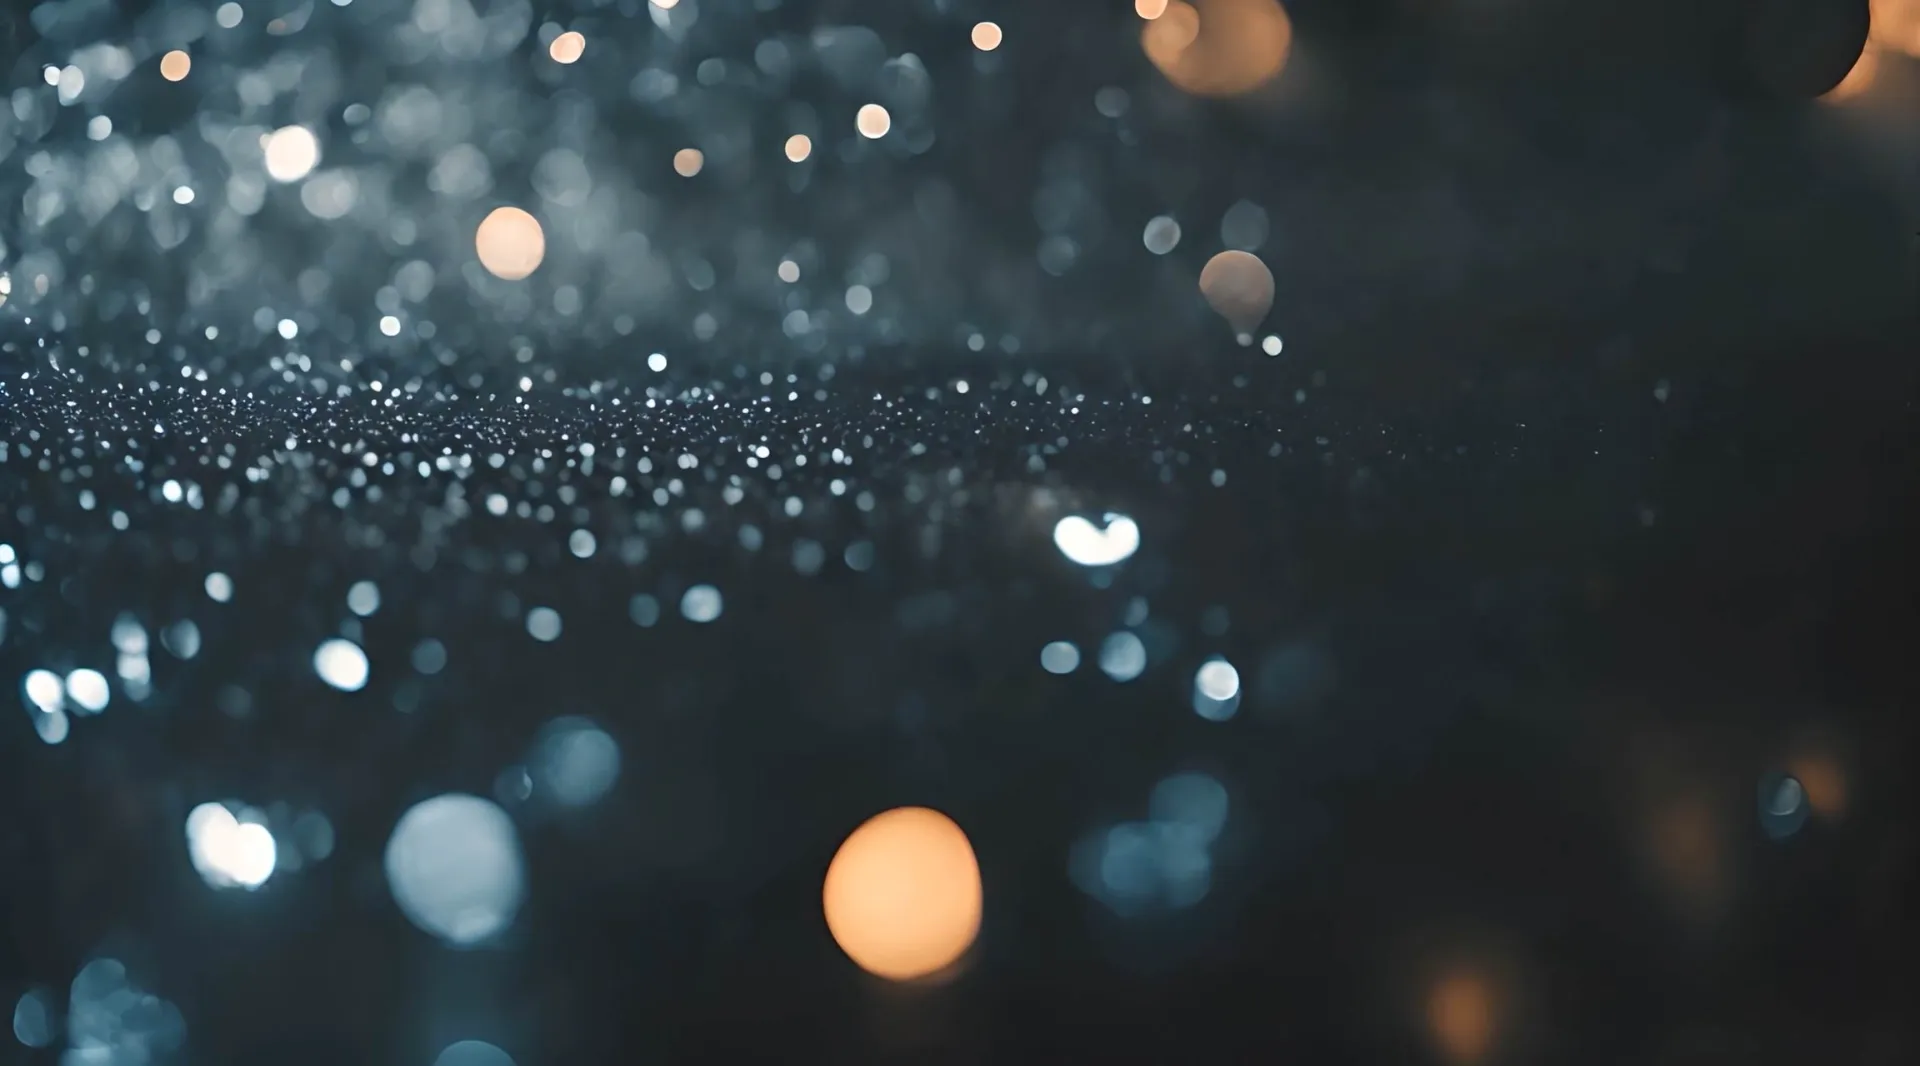 Cinematic Quality Water Droplets Stock Footage